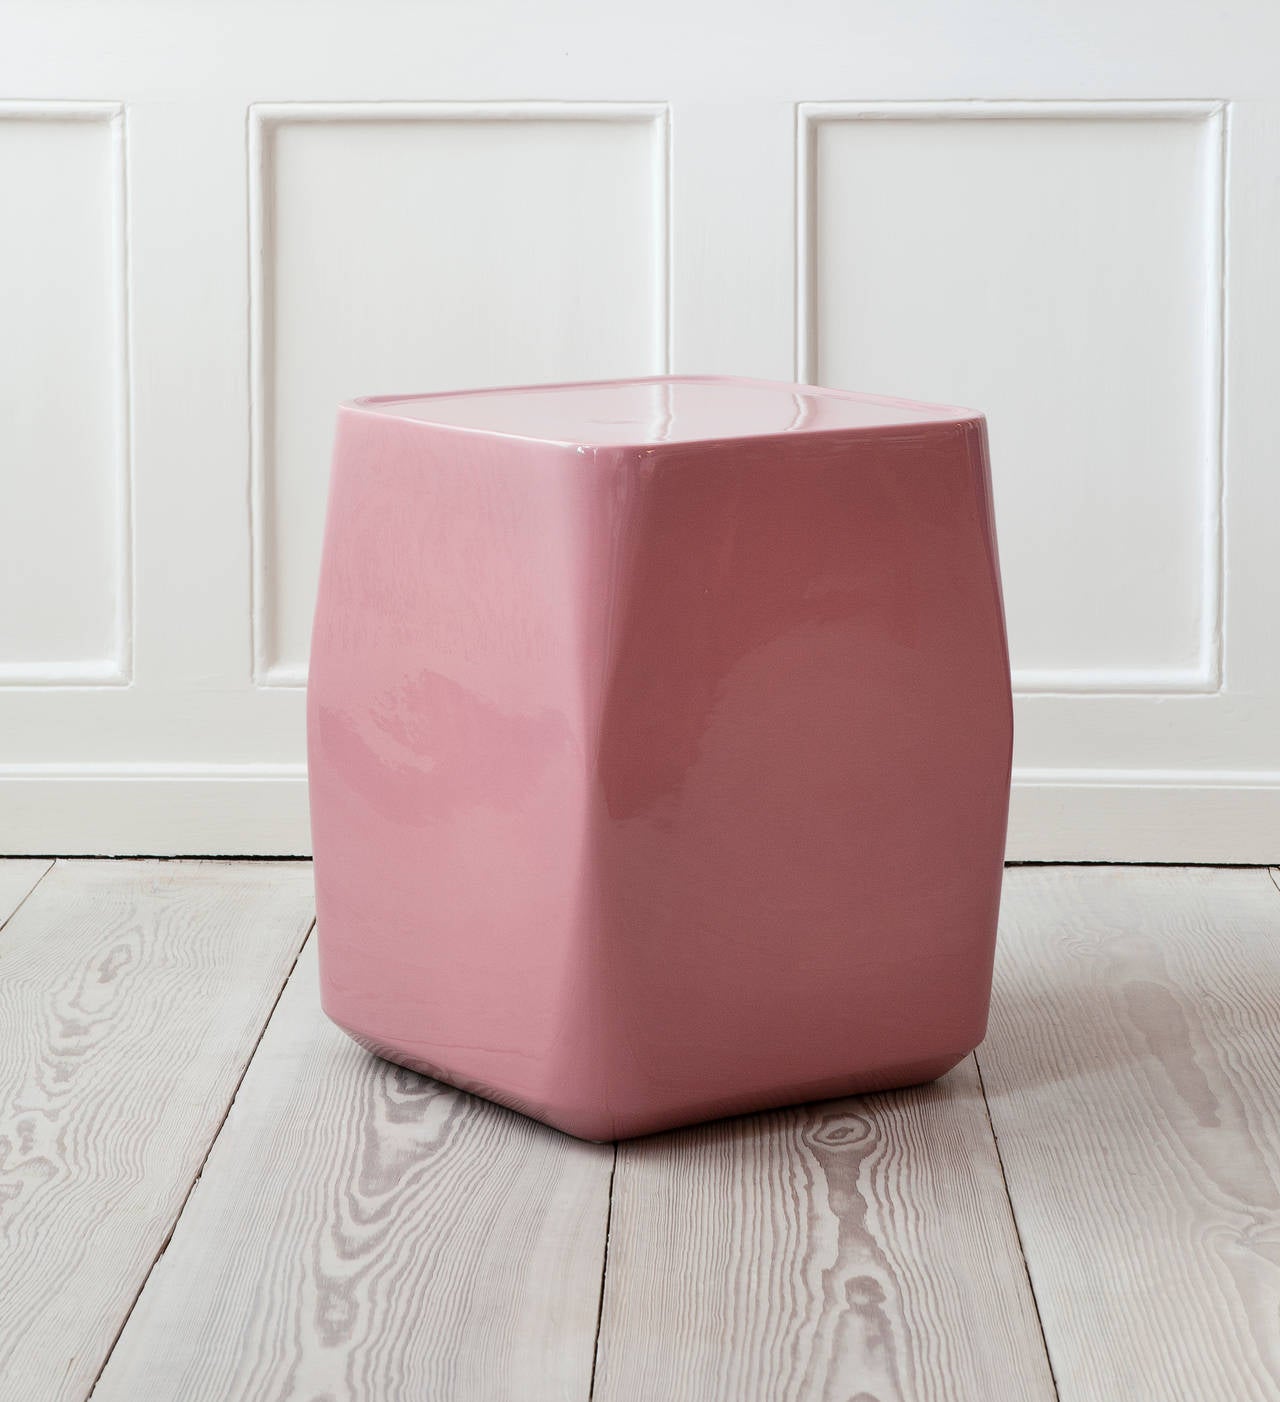 Beautiful ceramic side table in a rose glazing. Elegant rectangular shape with rounded corners.